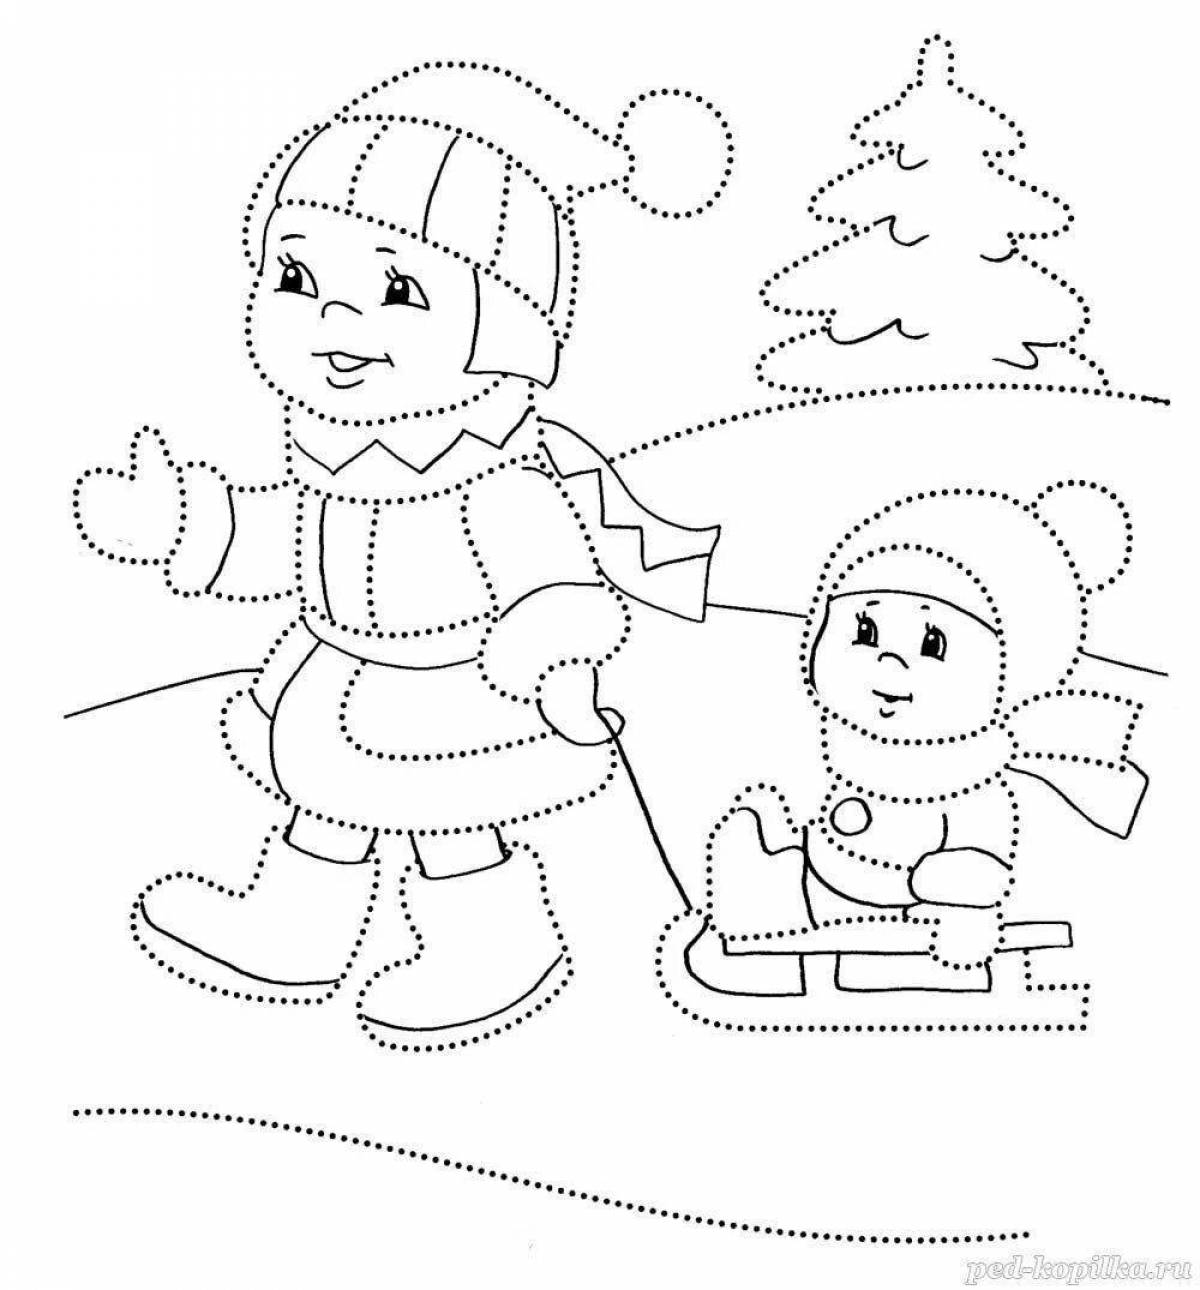 Ice winter coloring page